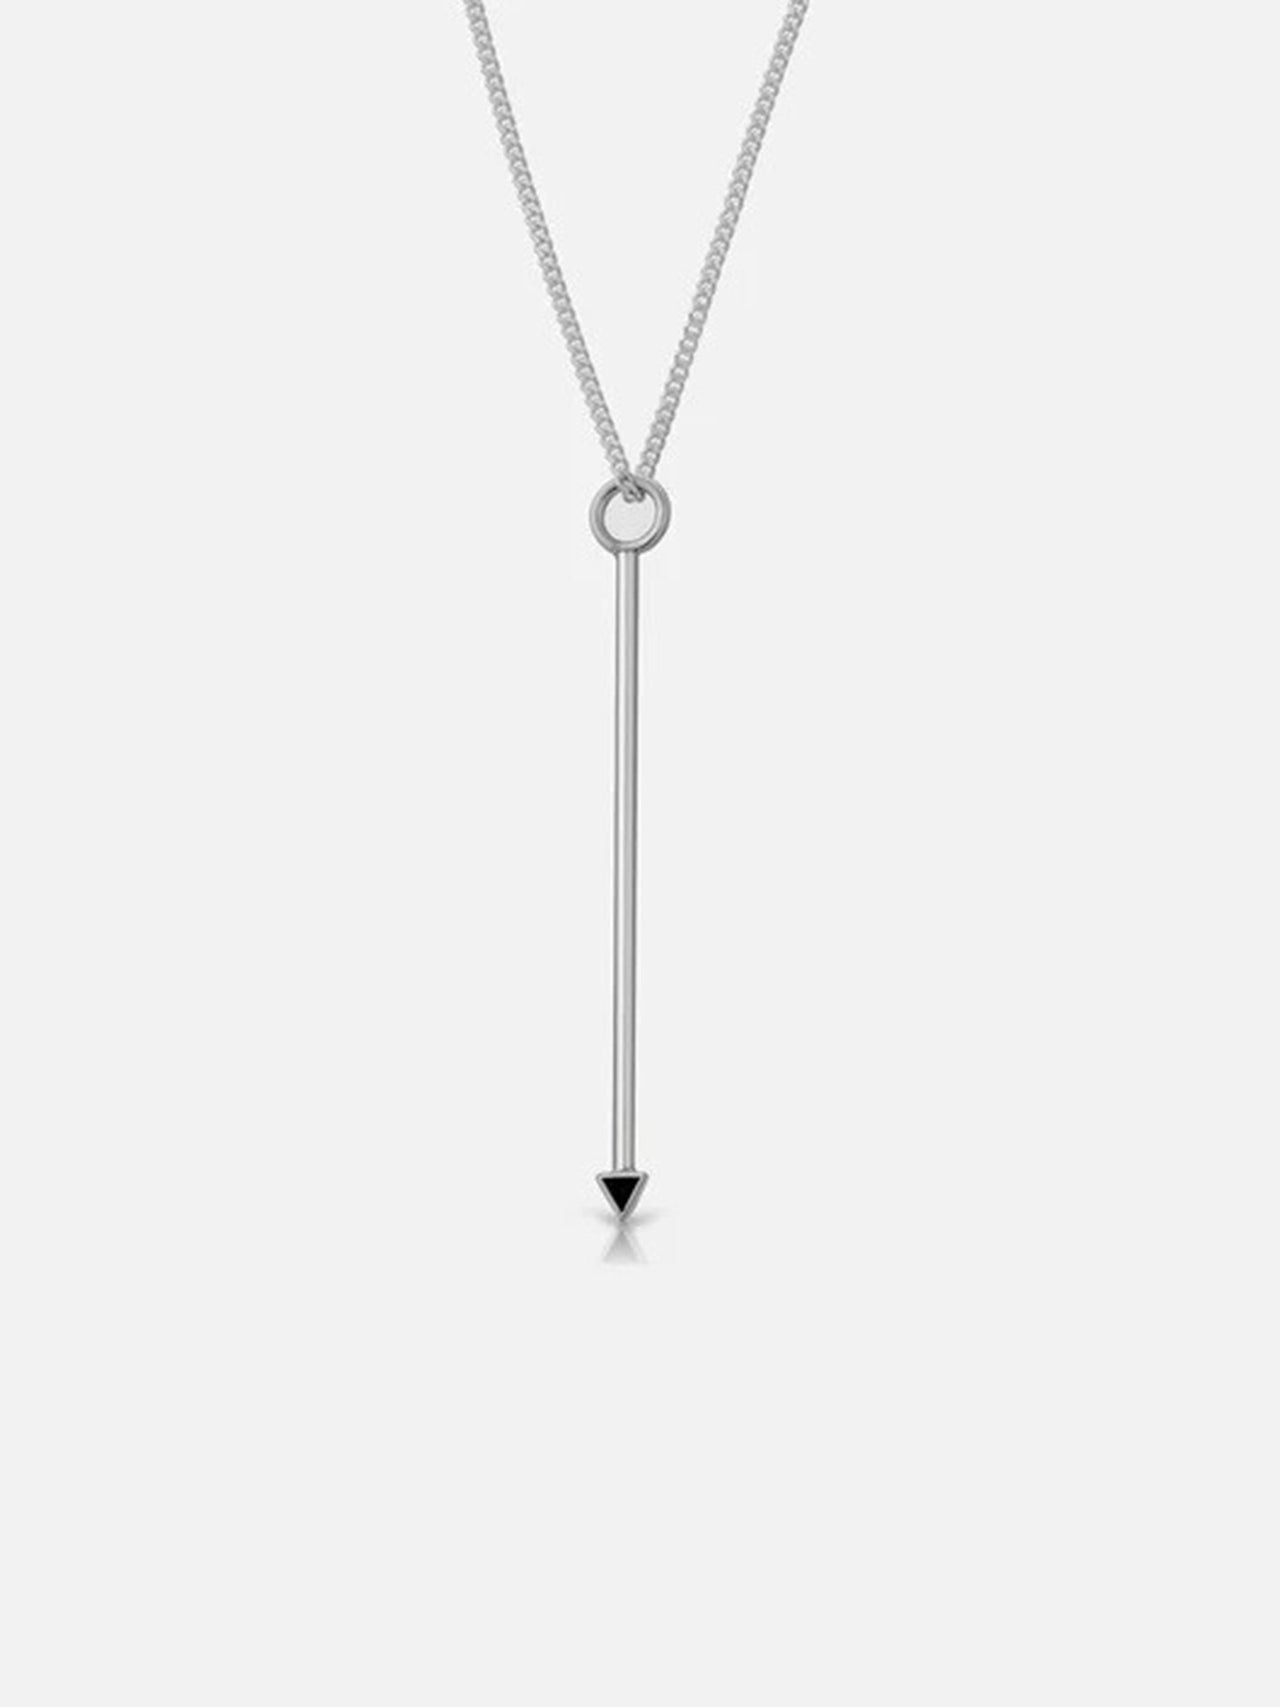 Toke Wand Necklace - ROE Capsule